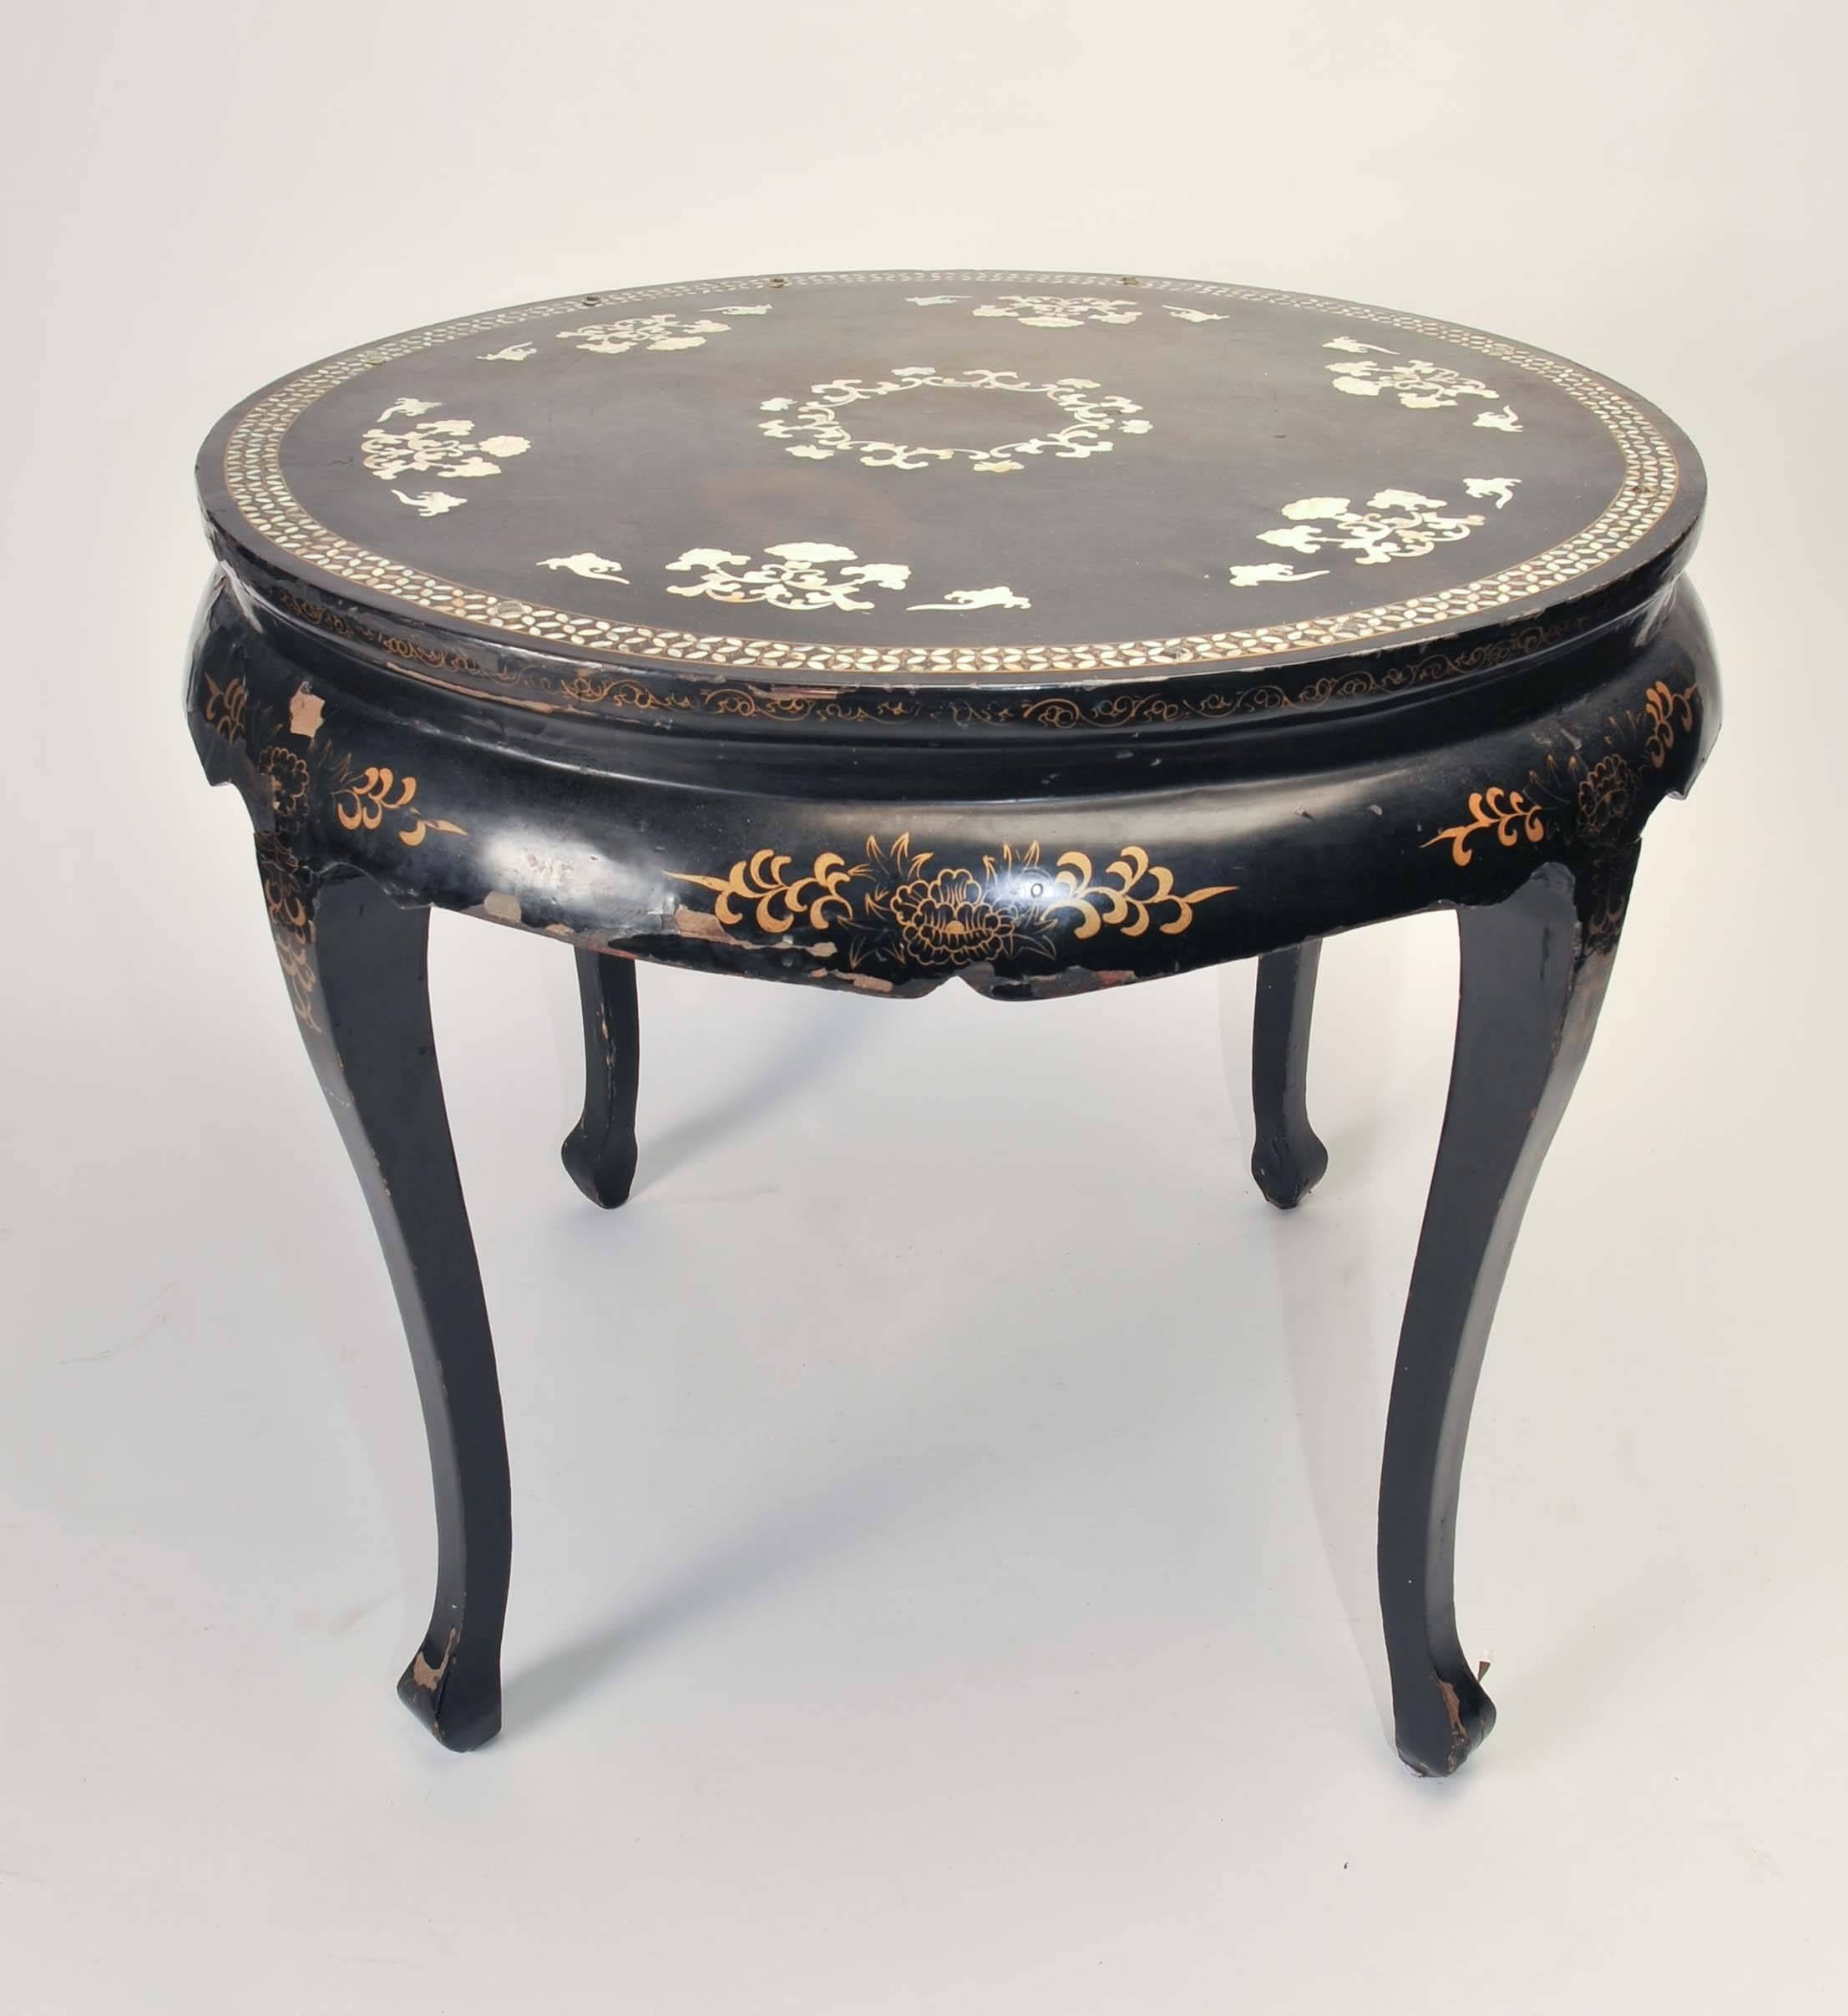 A chinoiserie mother-of-pearl inlay table, late 19th century.